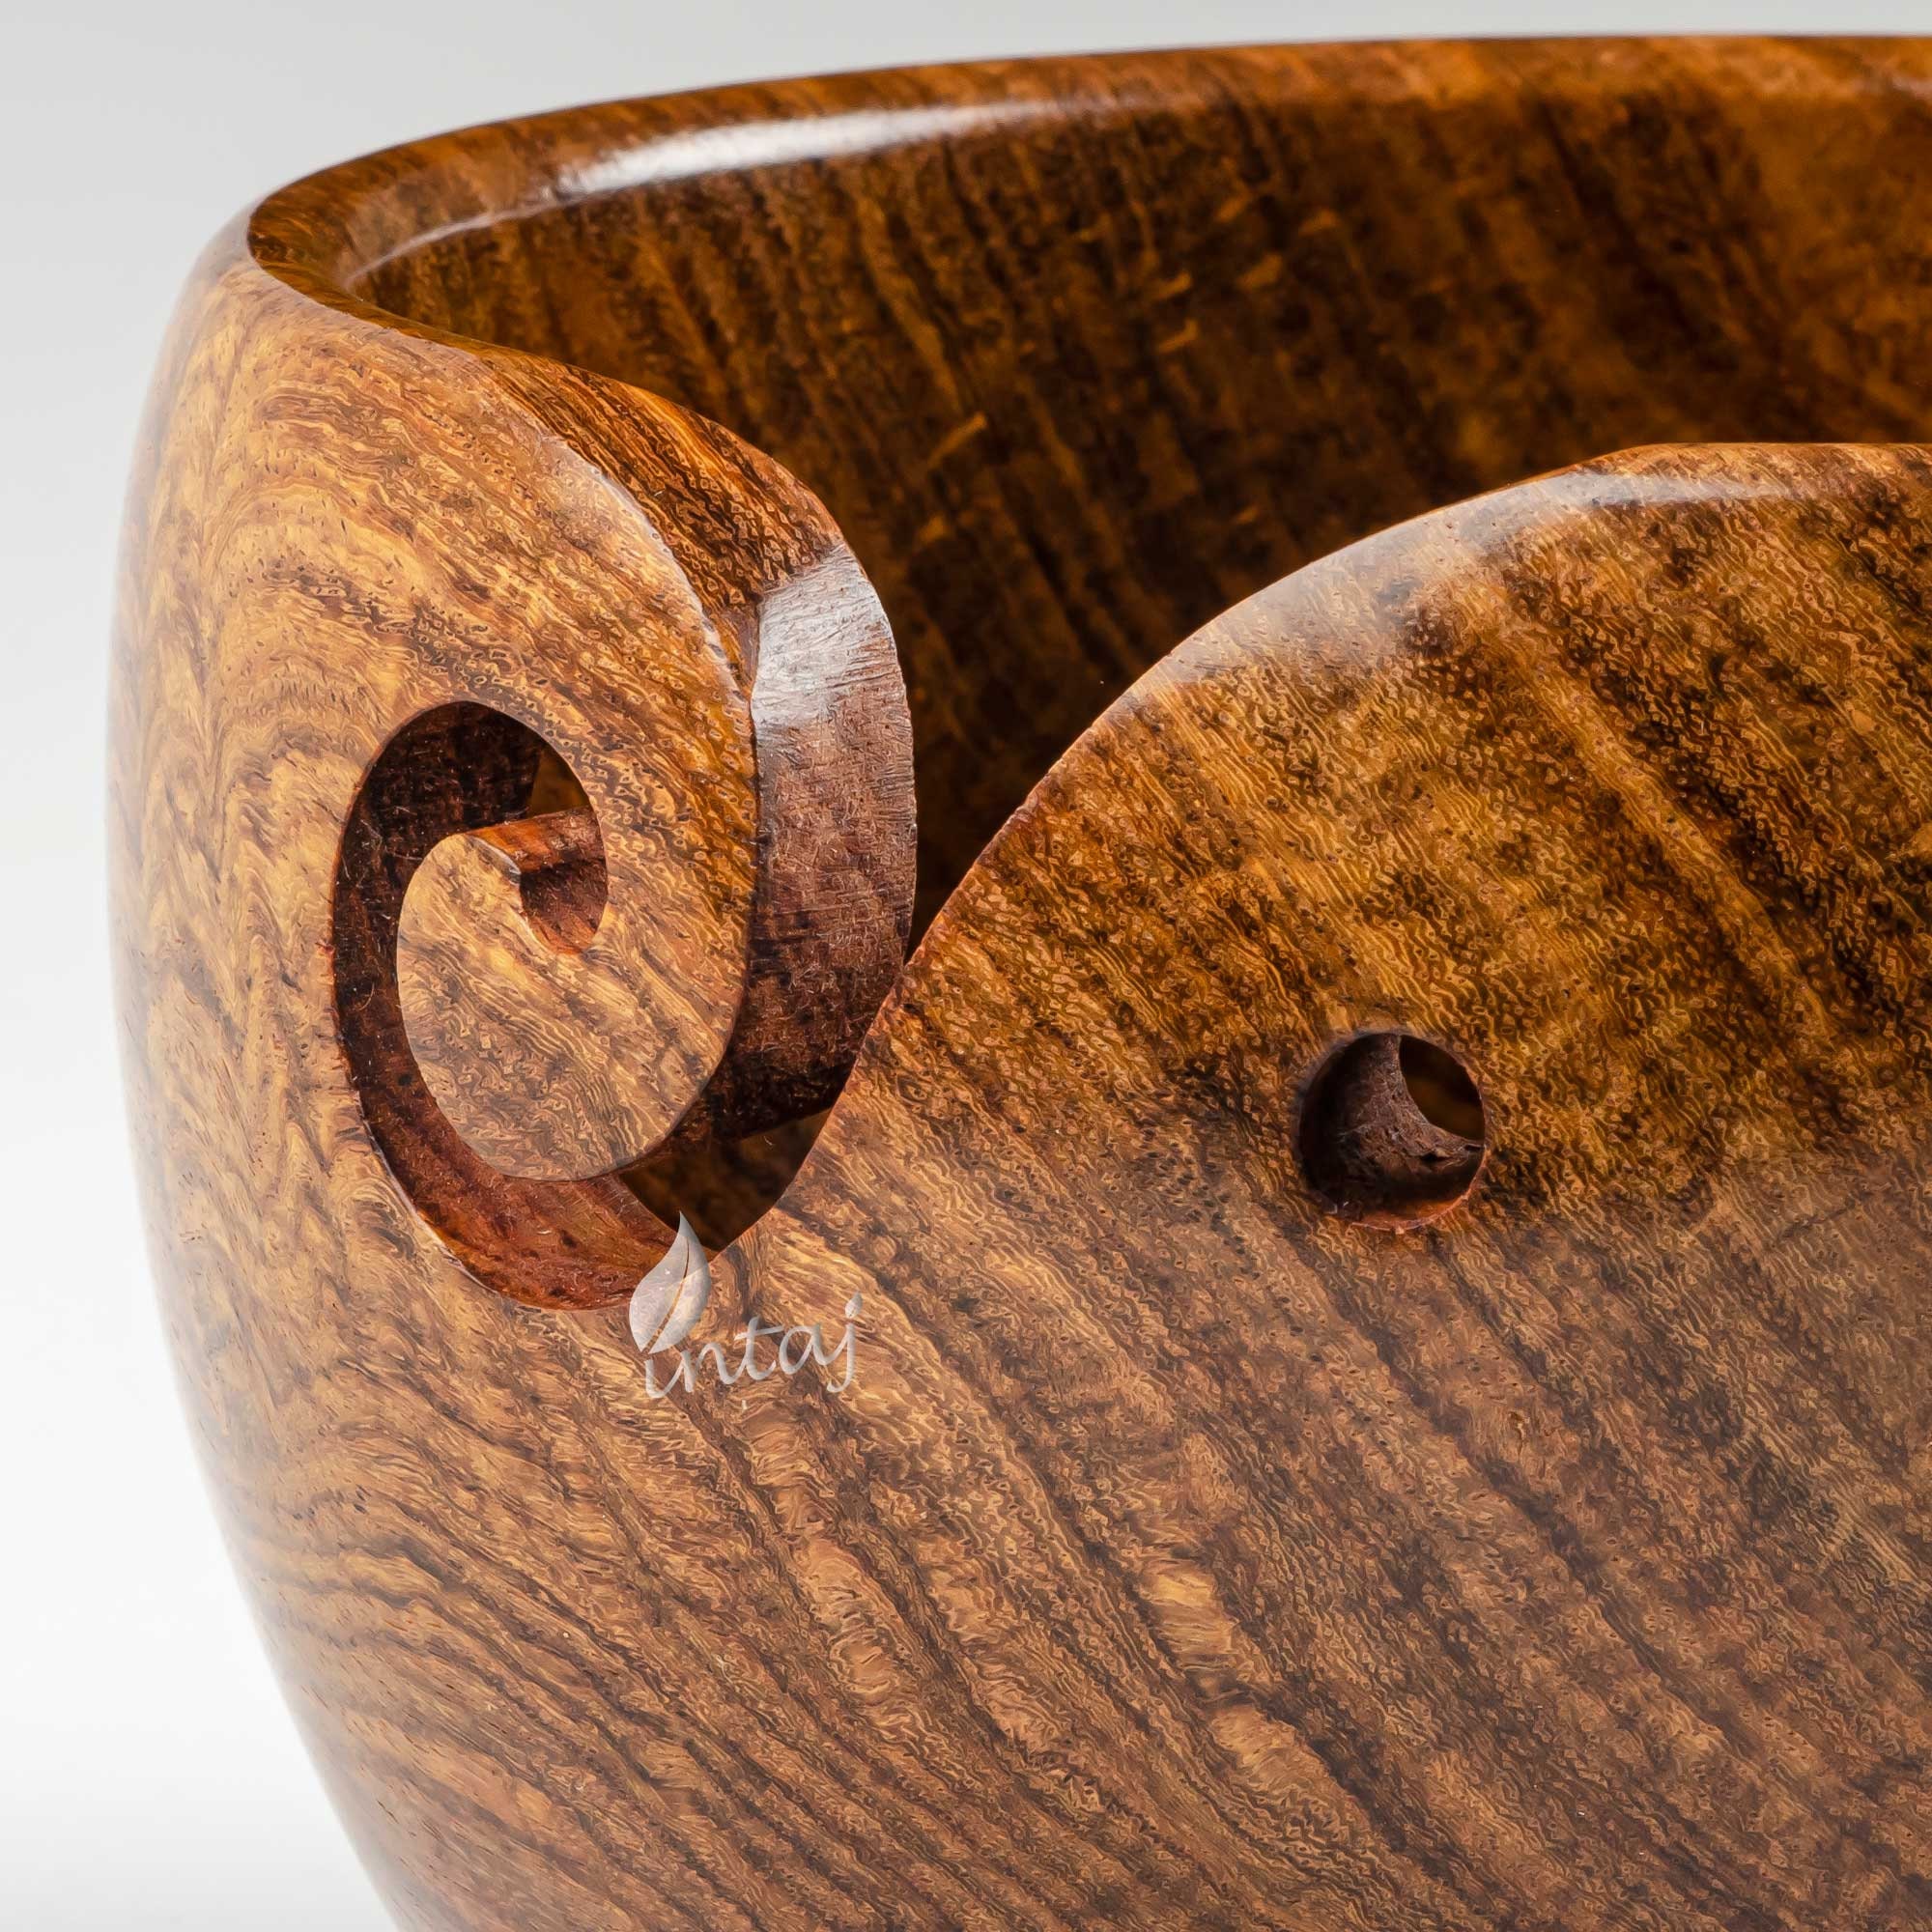 Wooden Yarn Bowl with Holes Holder 7.87''3''Rosewood Handmade